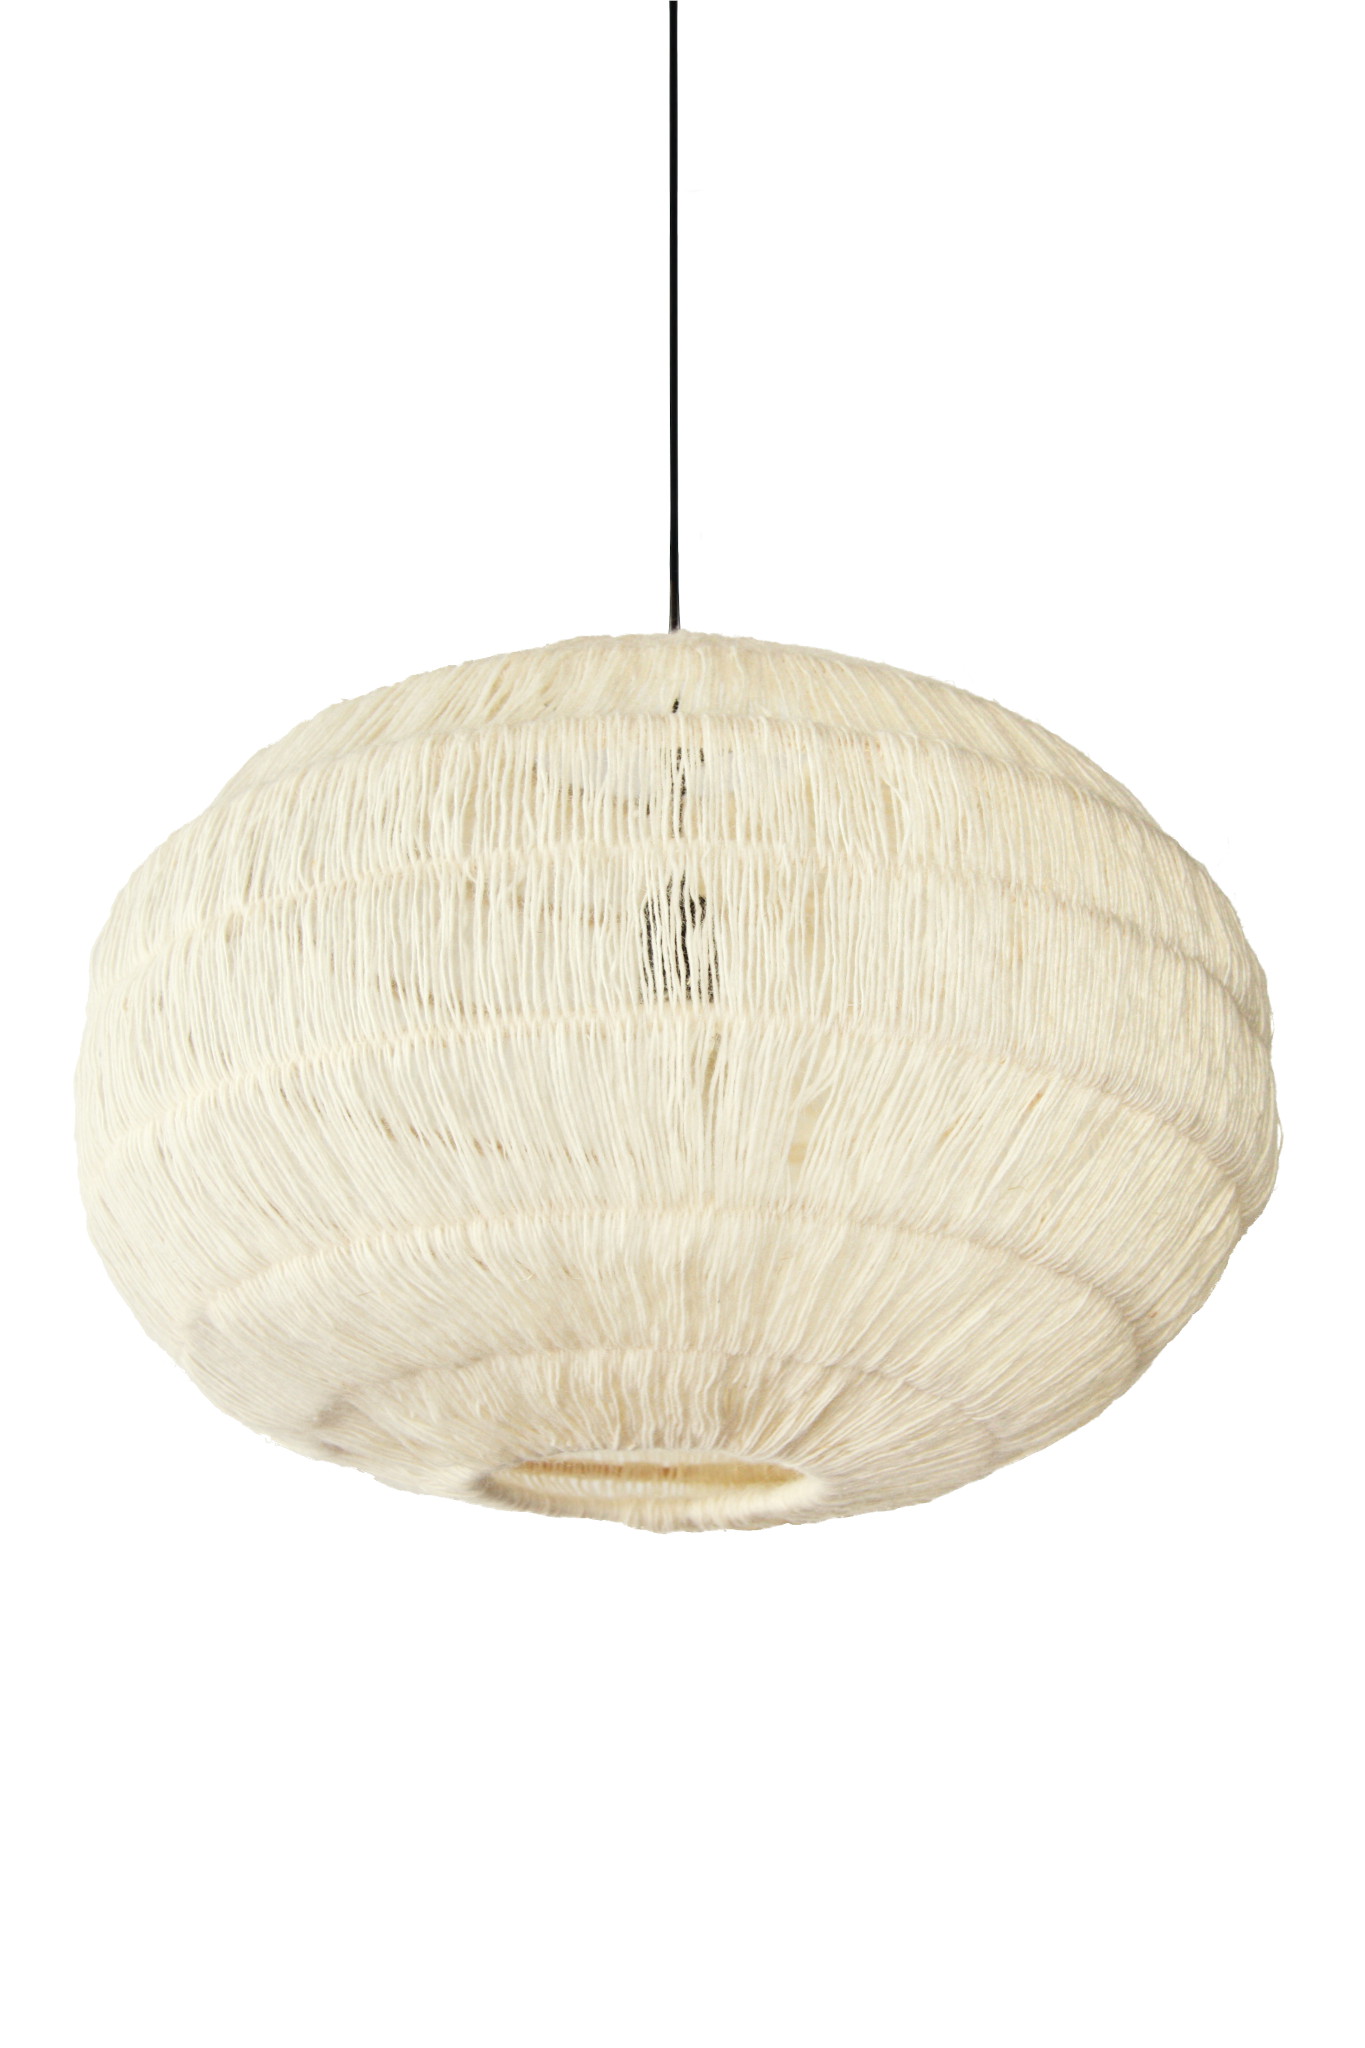 Nonjetable-Nonjetable-White-Wool-Pendant-Lamp